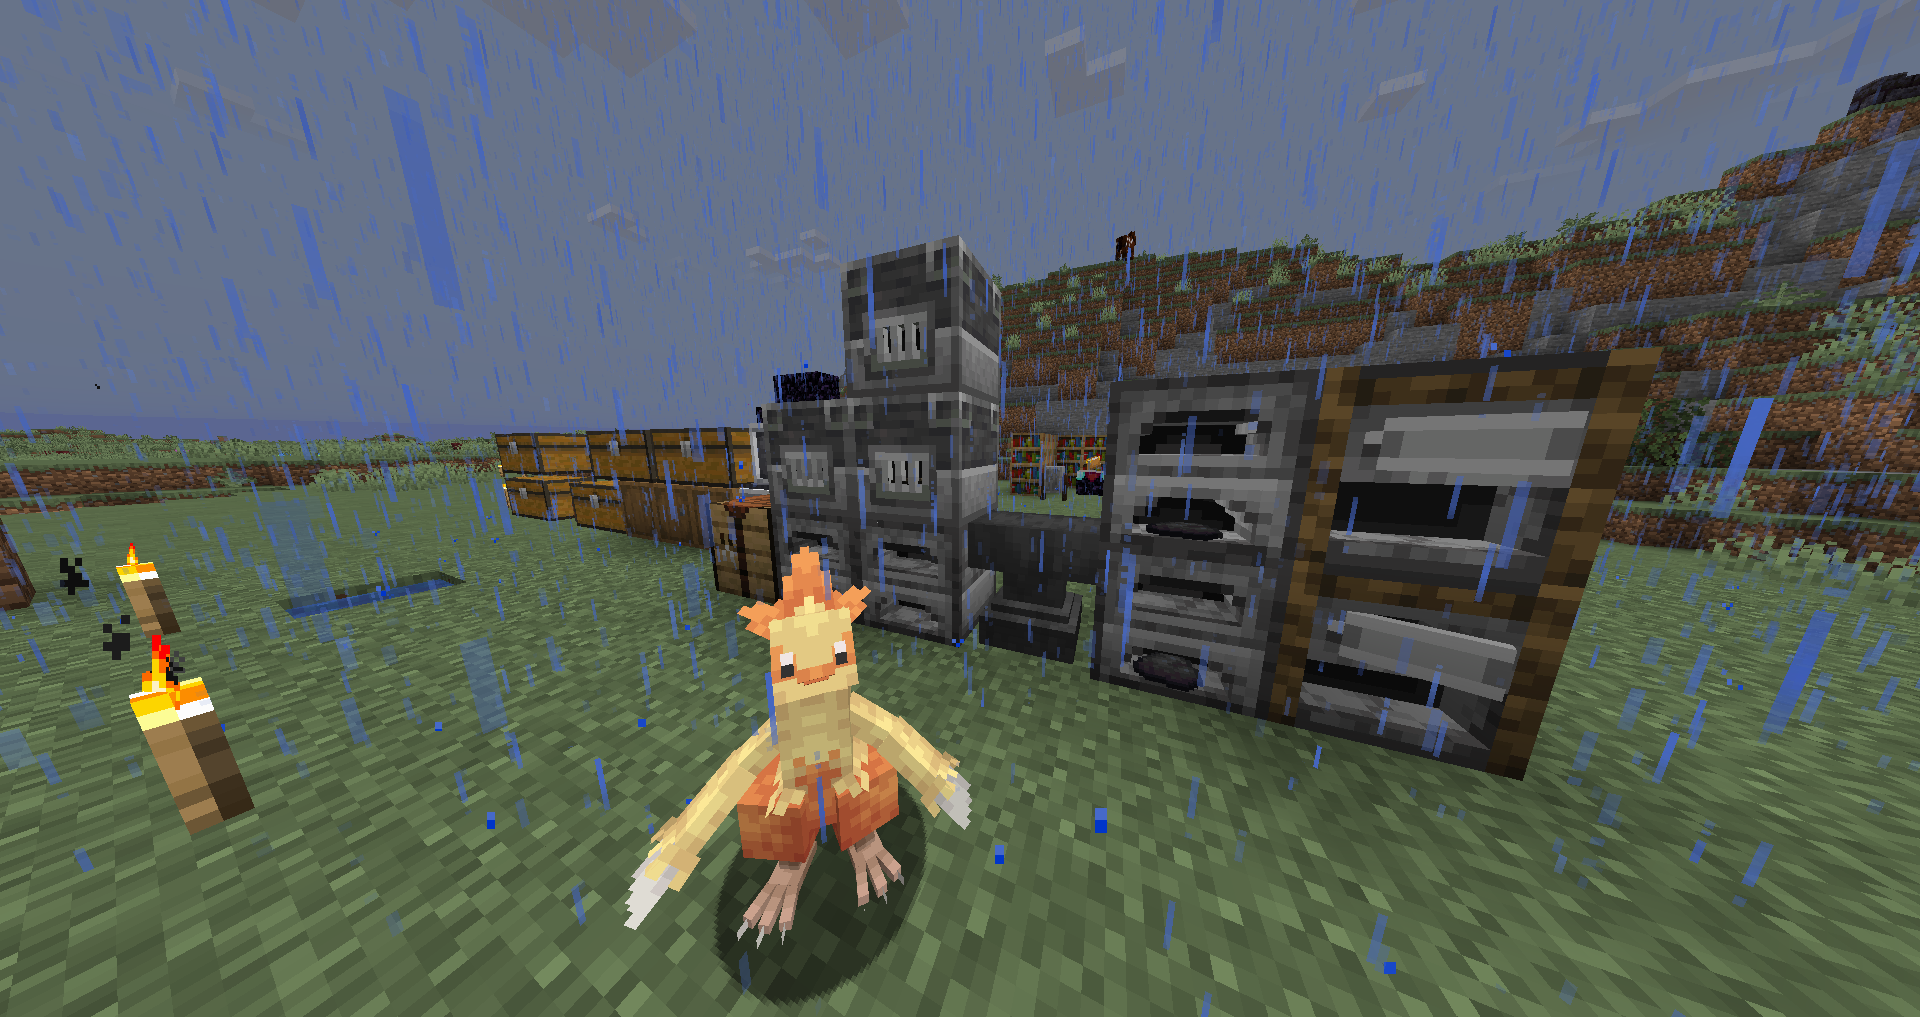 Combusken and the Furnaces